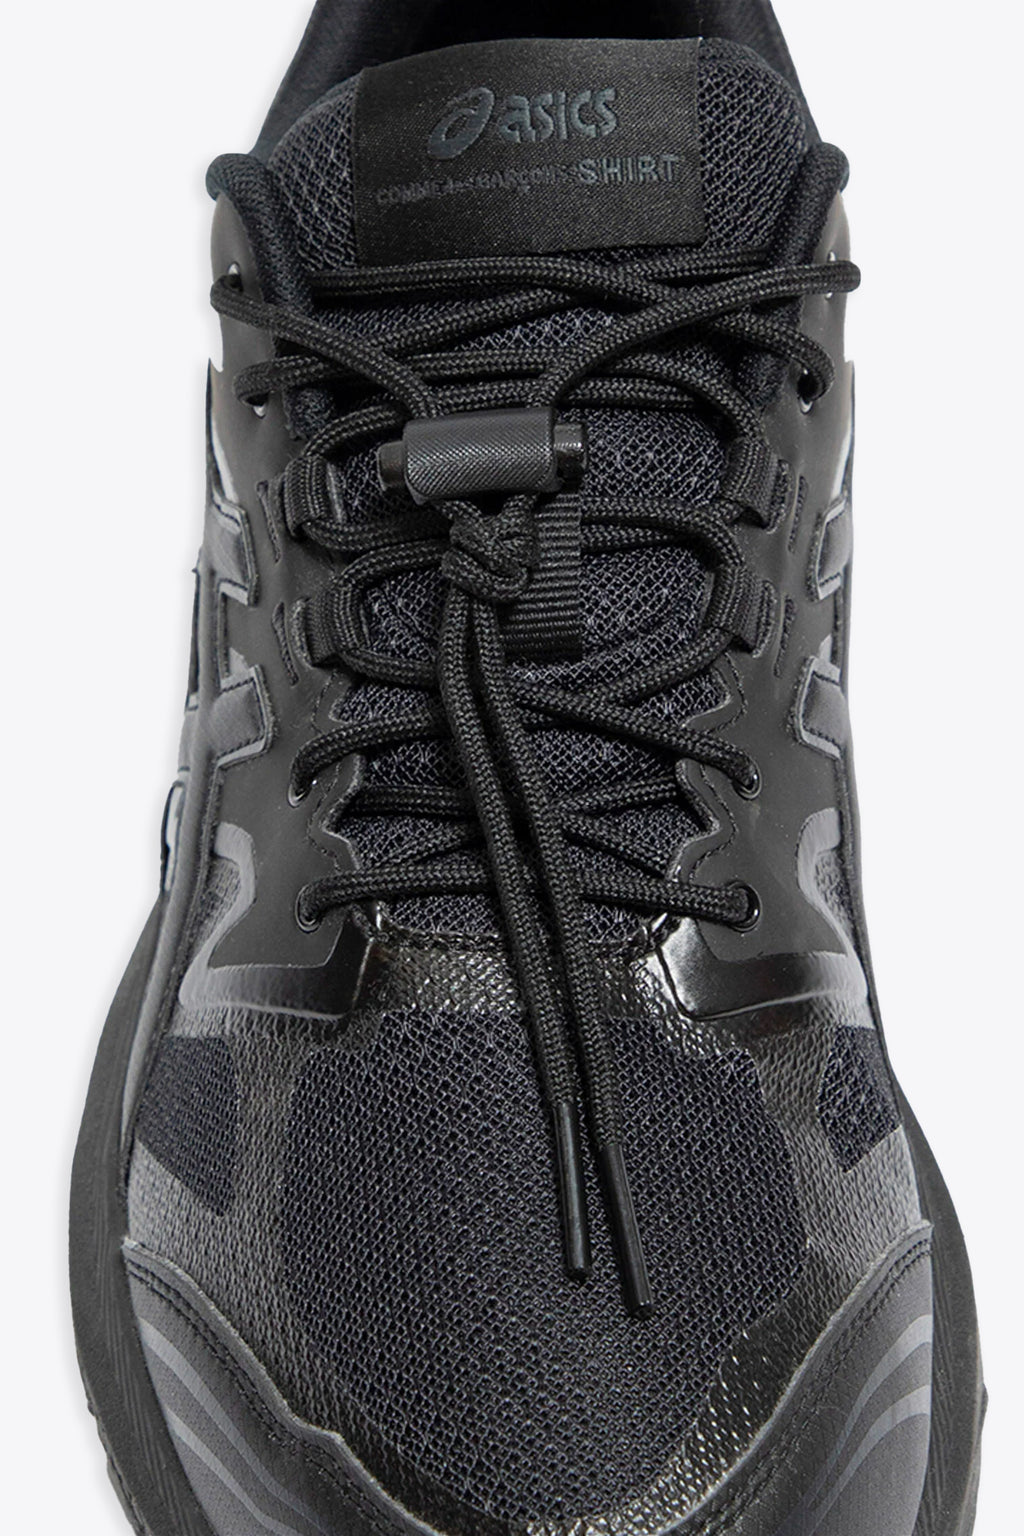 alt-image__Asics-collaboration-black-mesh-and-leather-running-sneaker